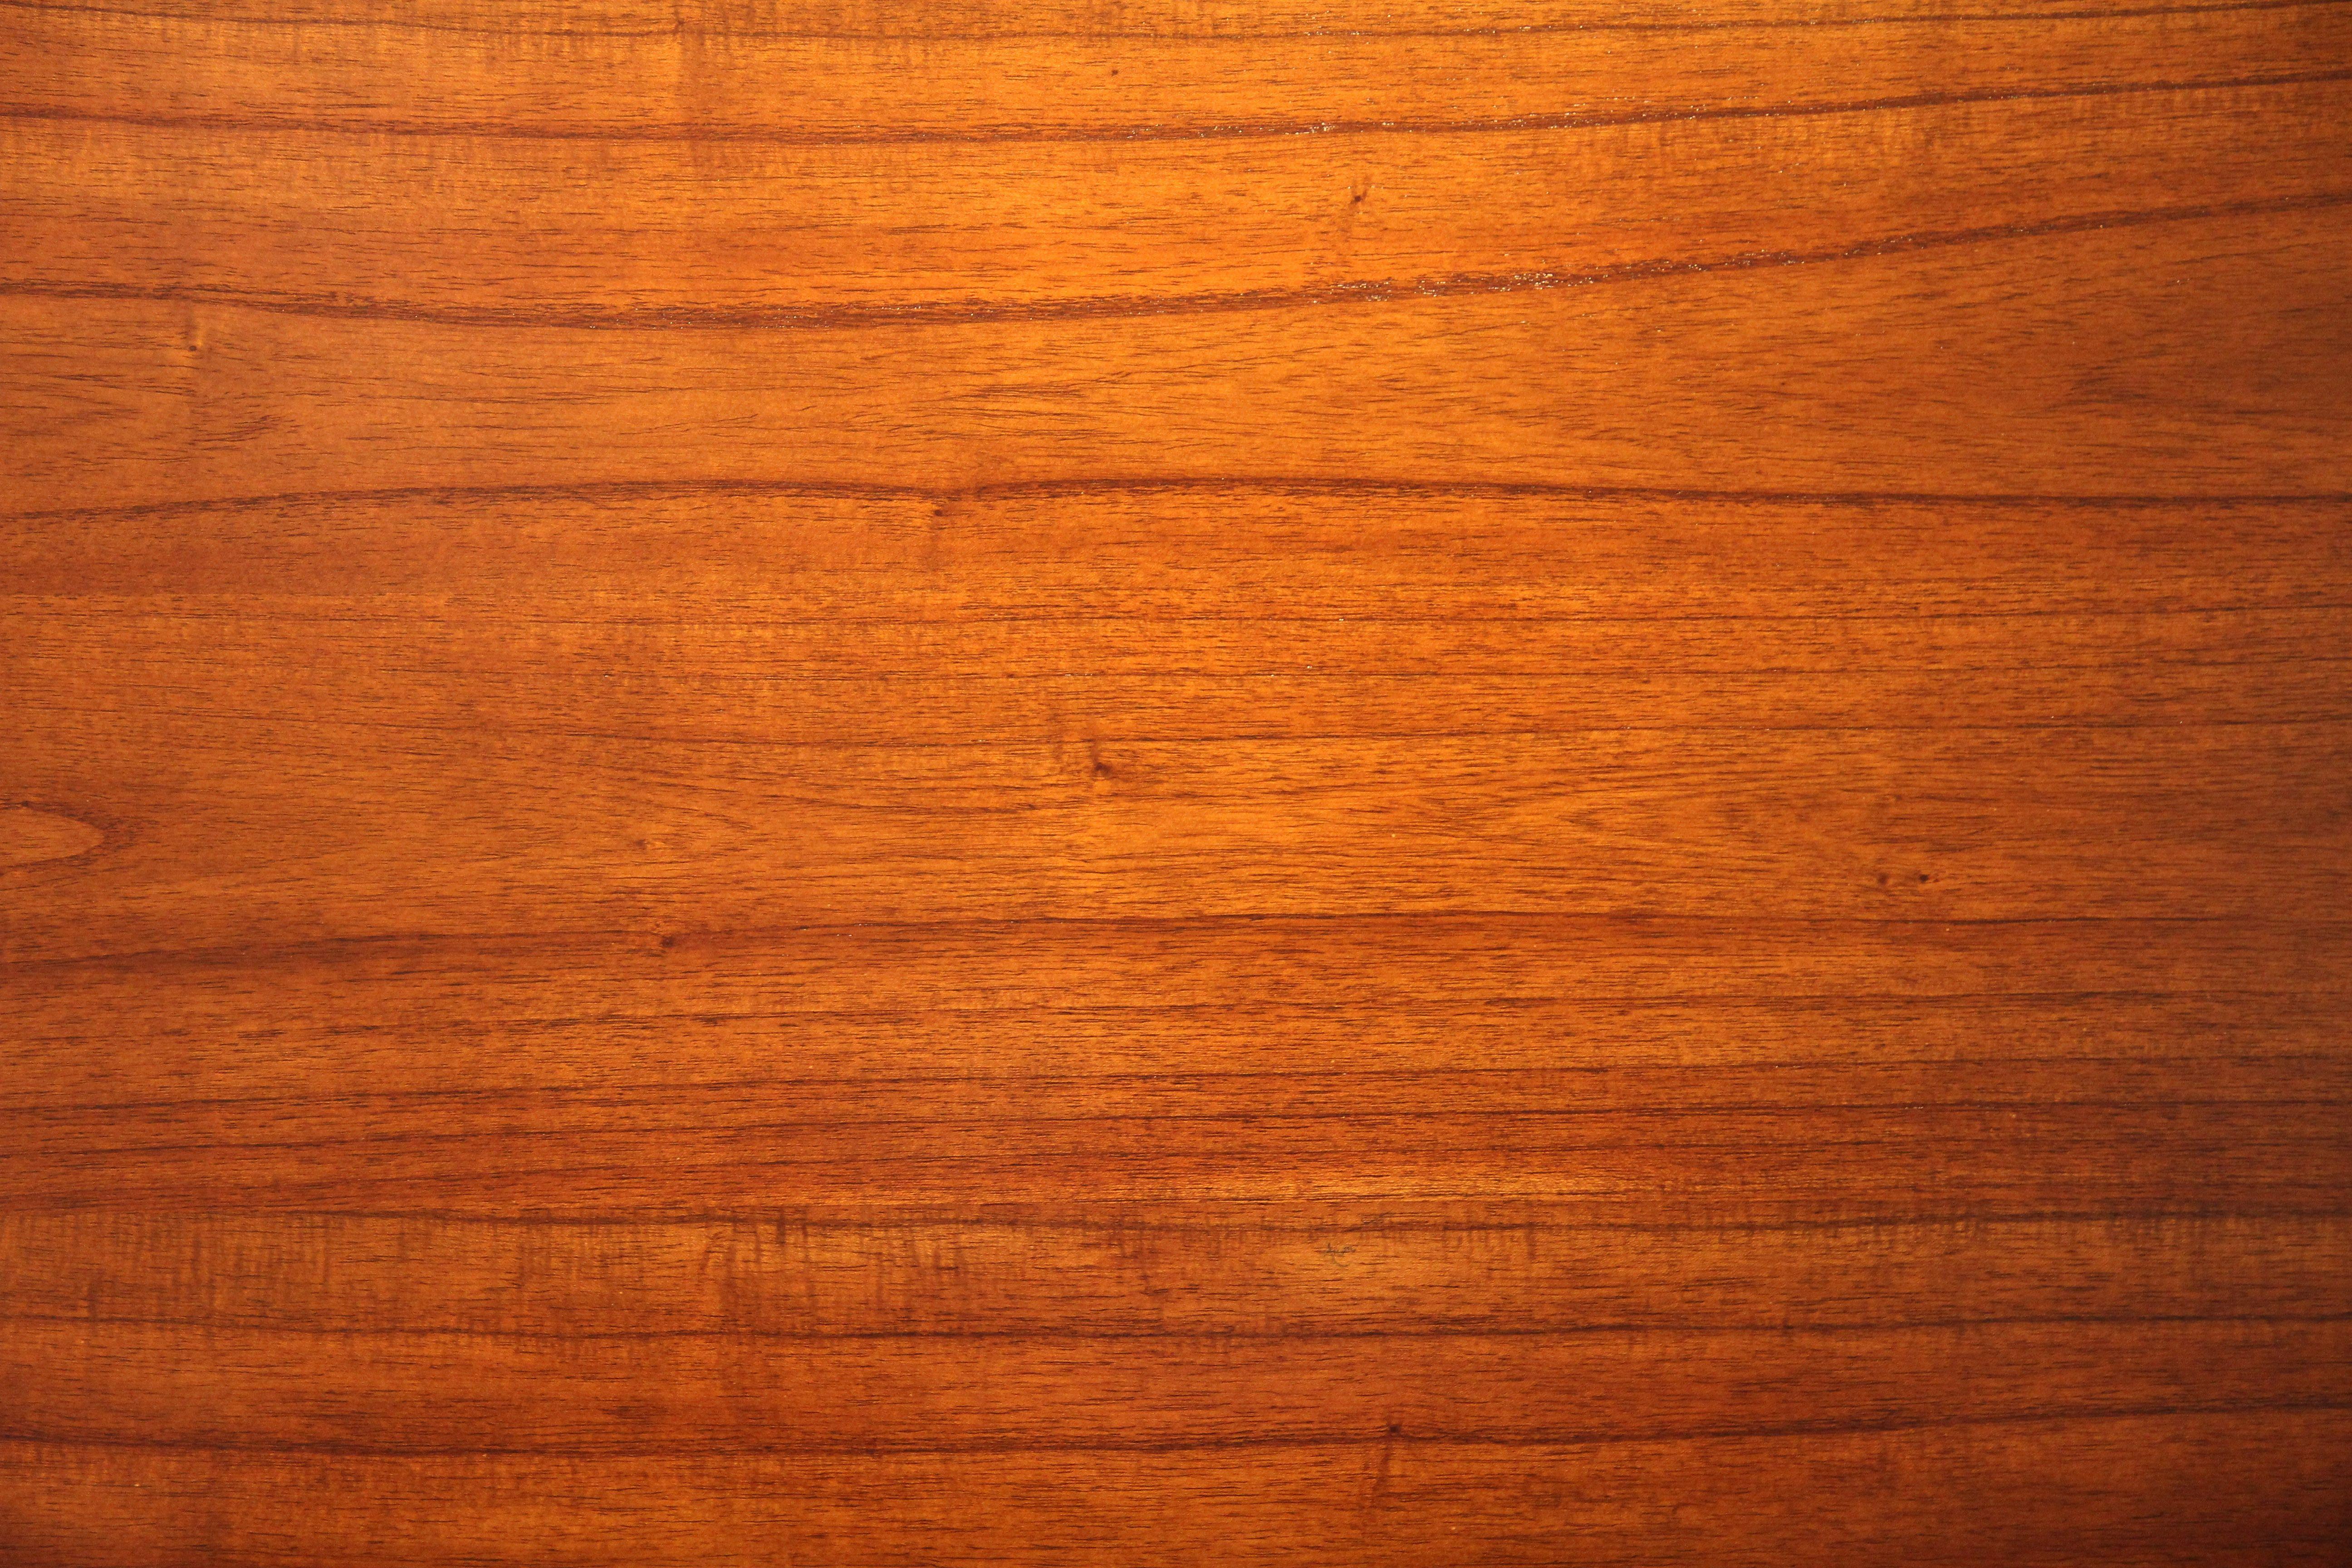 red wood texture grain natural wooden paneling surface photo